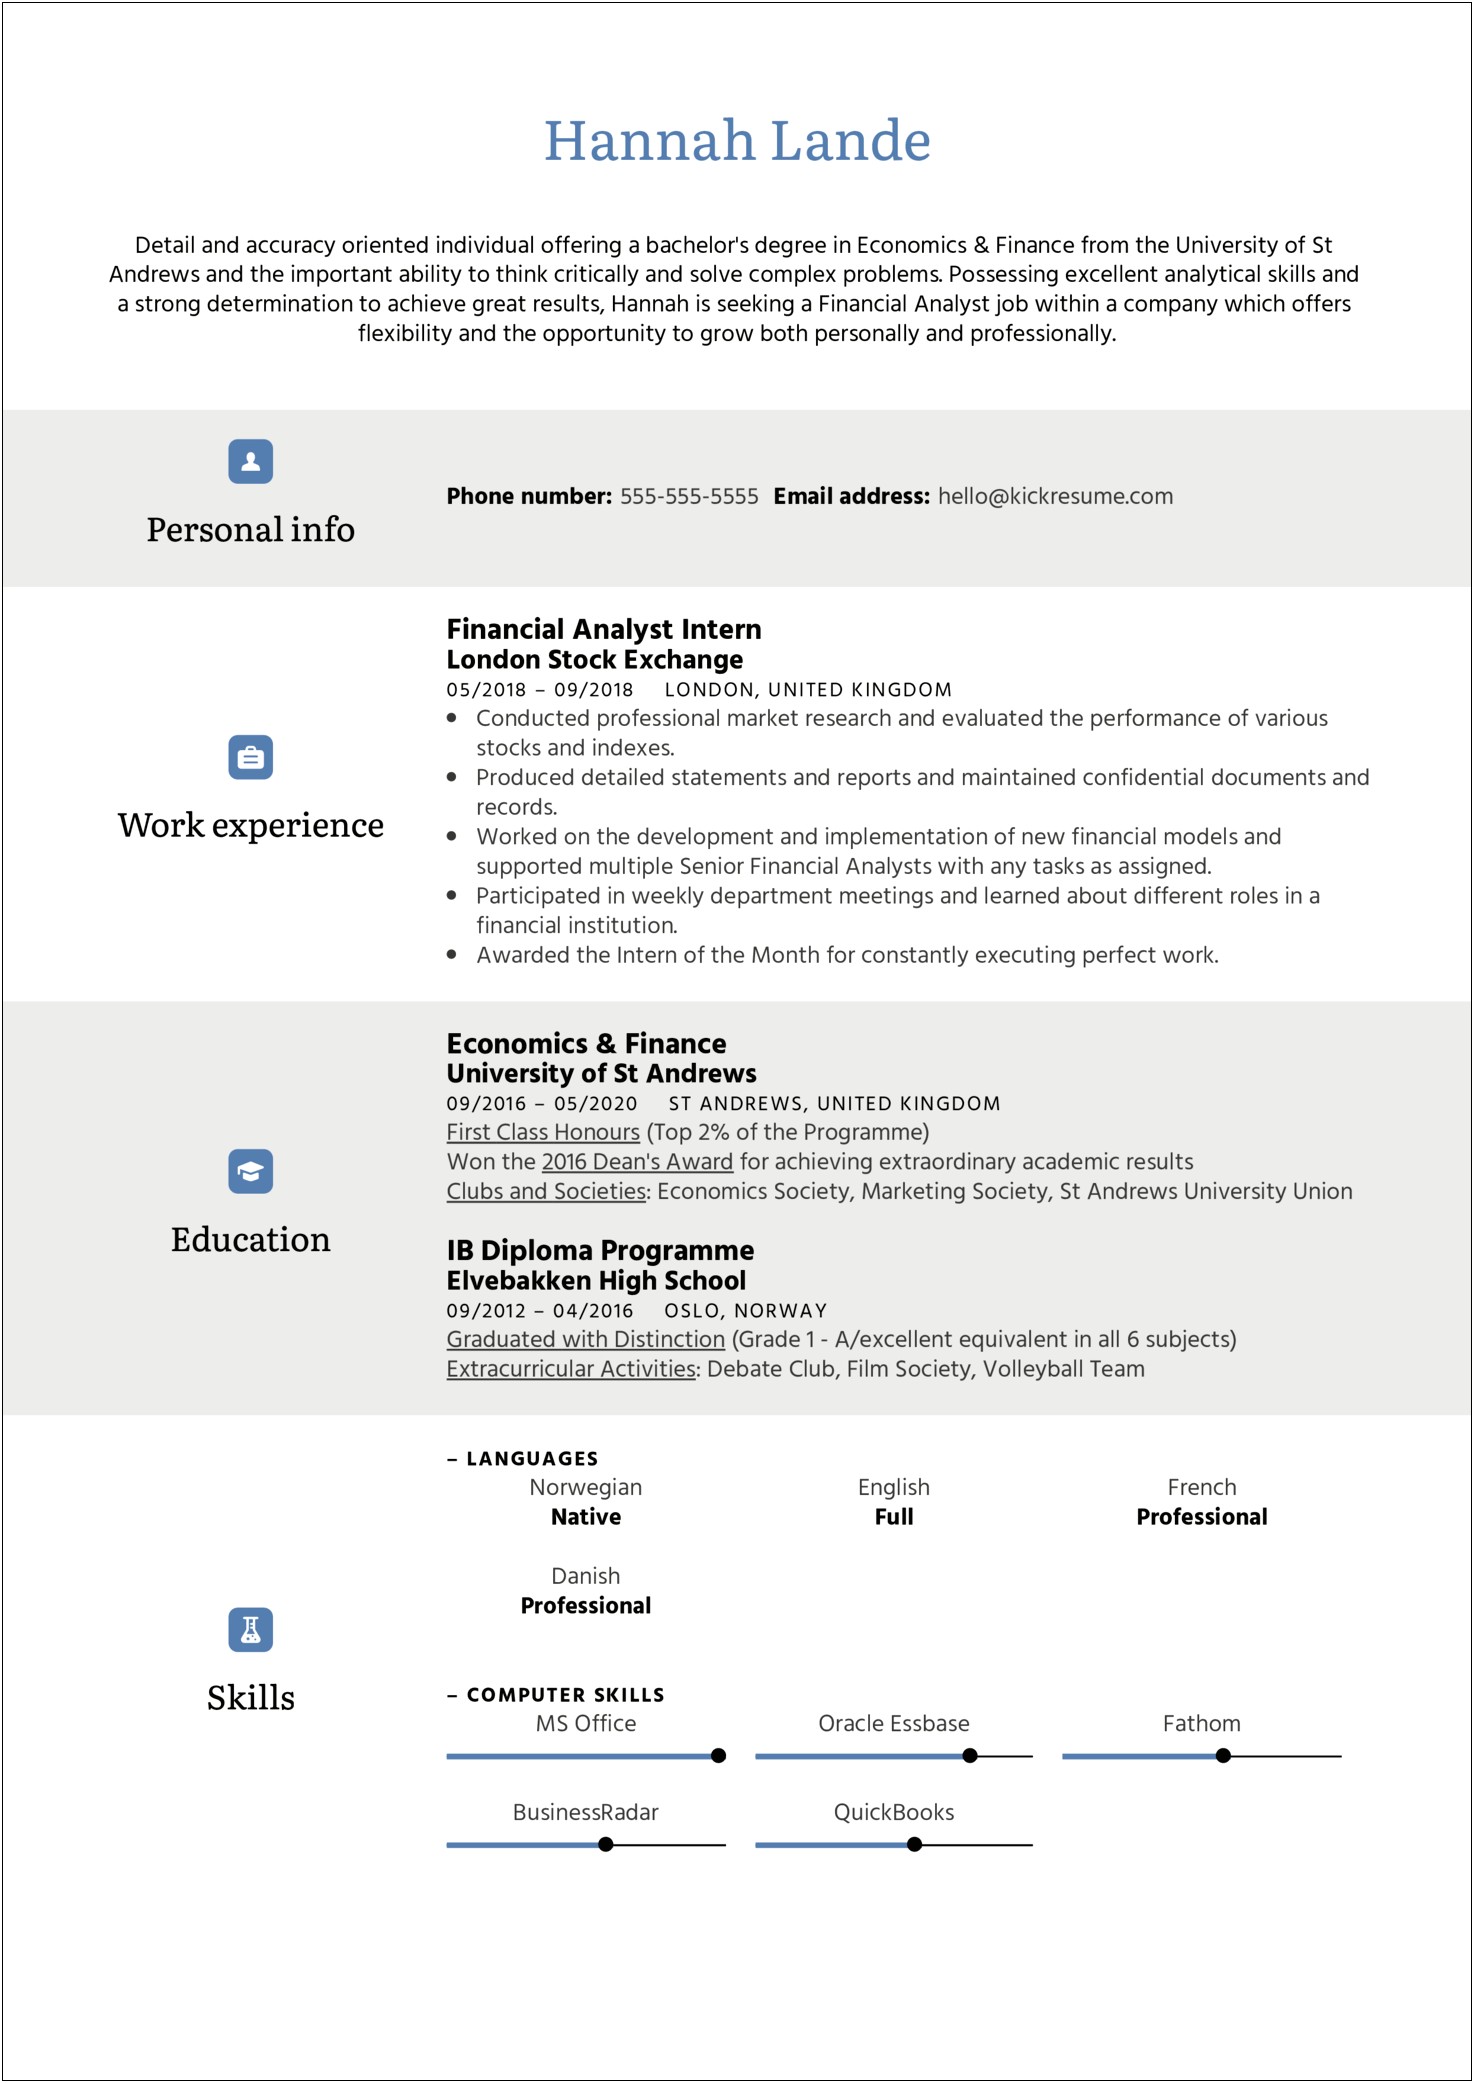 Resume Objective Examples For Financial Analyst